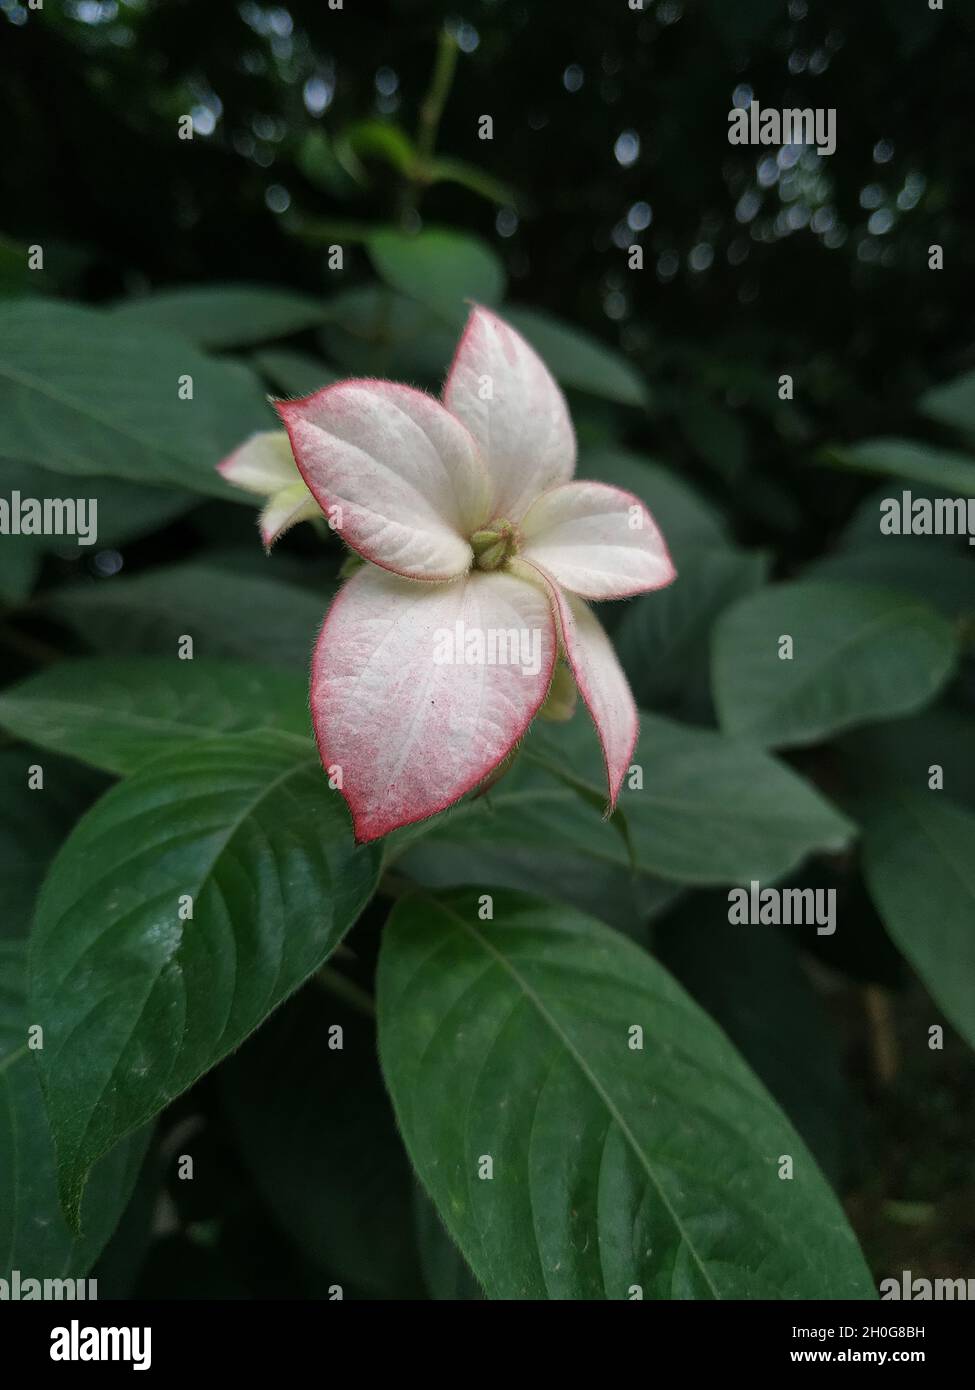 Close-up shot of a beautiful white flower growing in nature. Stock Photo